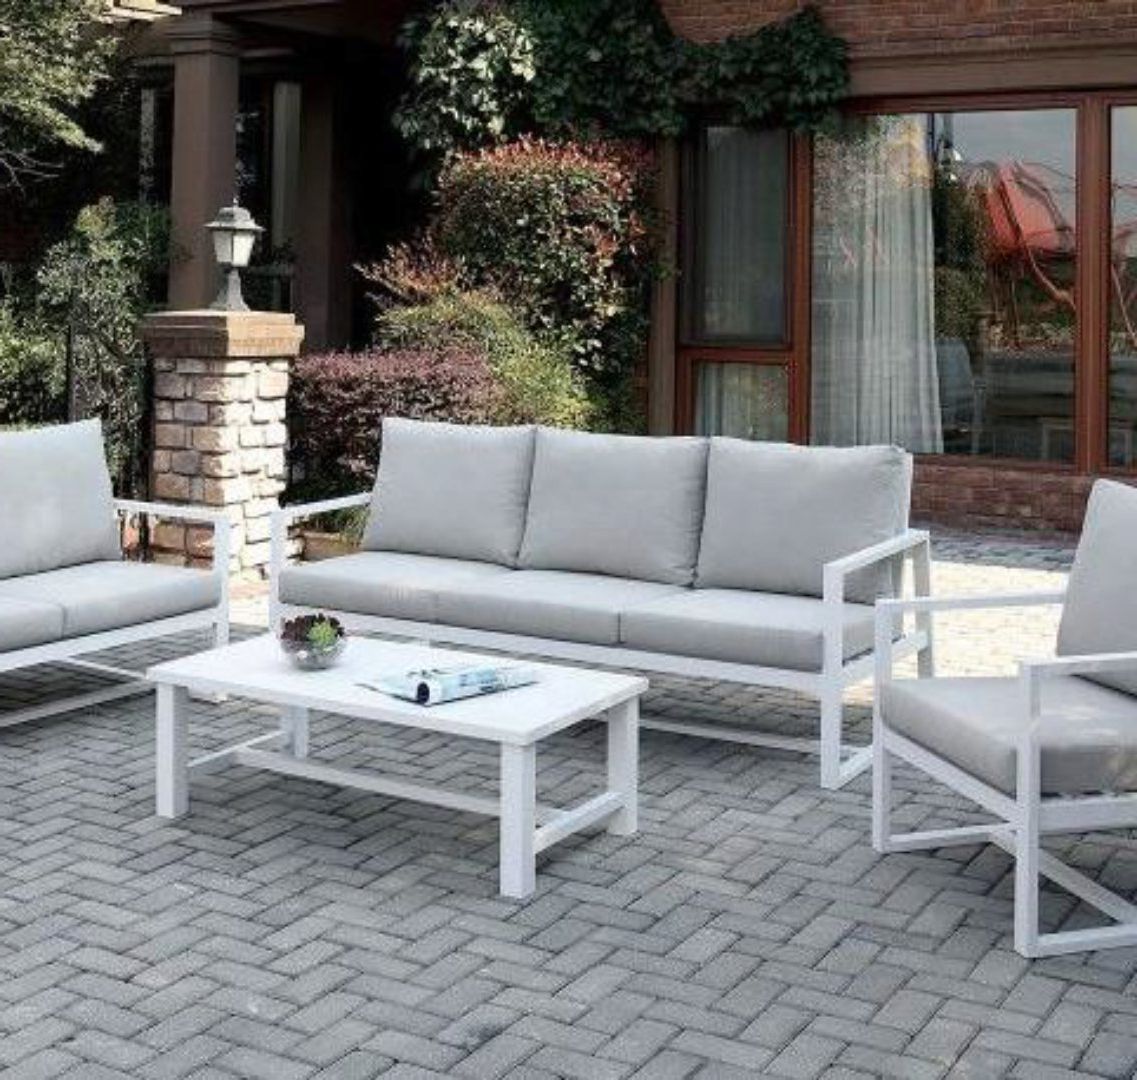 Aluminum Frame Construction Beige Fabric Patio Sofa Set Regarding Newest Ecru And Otter Coffee Tables (Gallery 4 of 20)